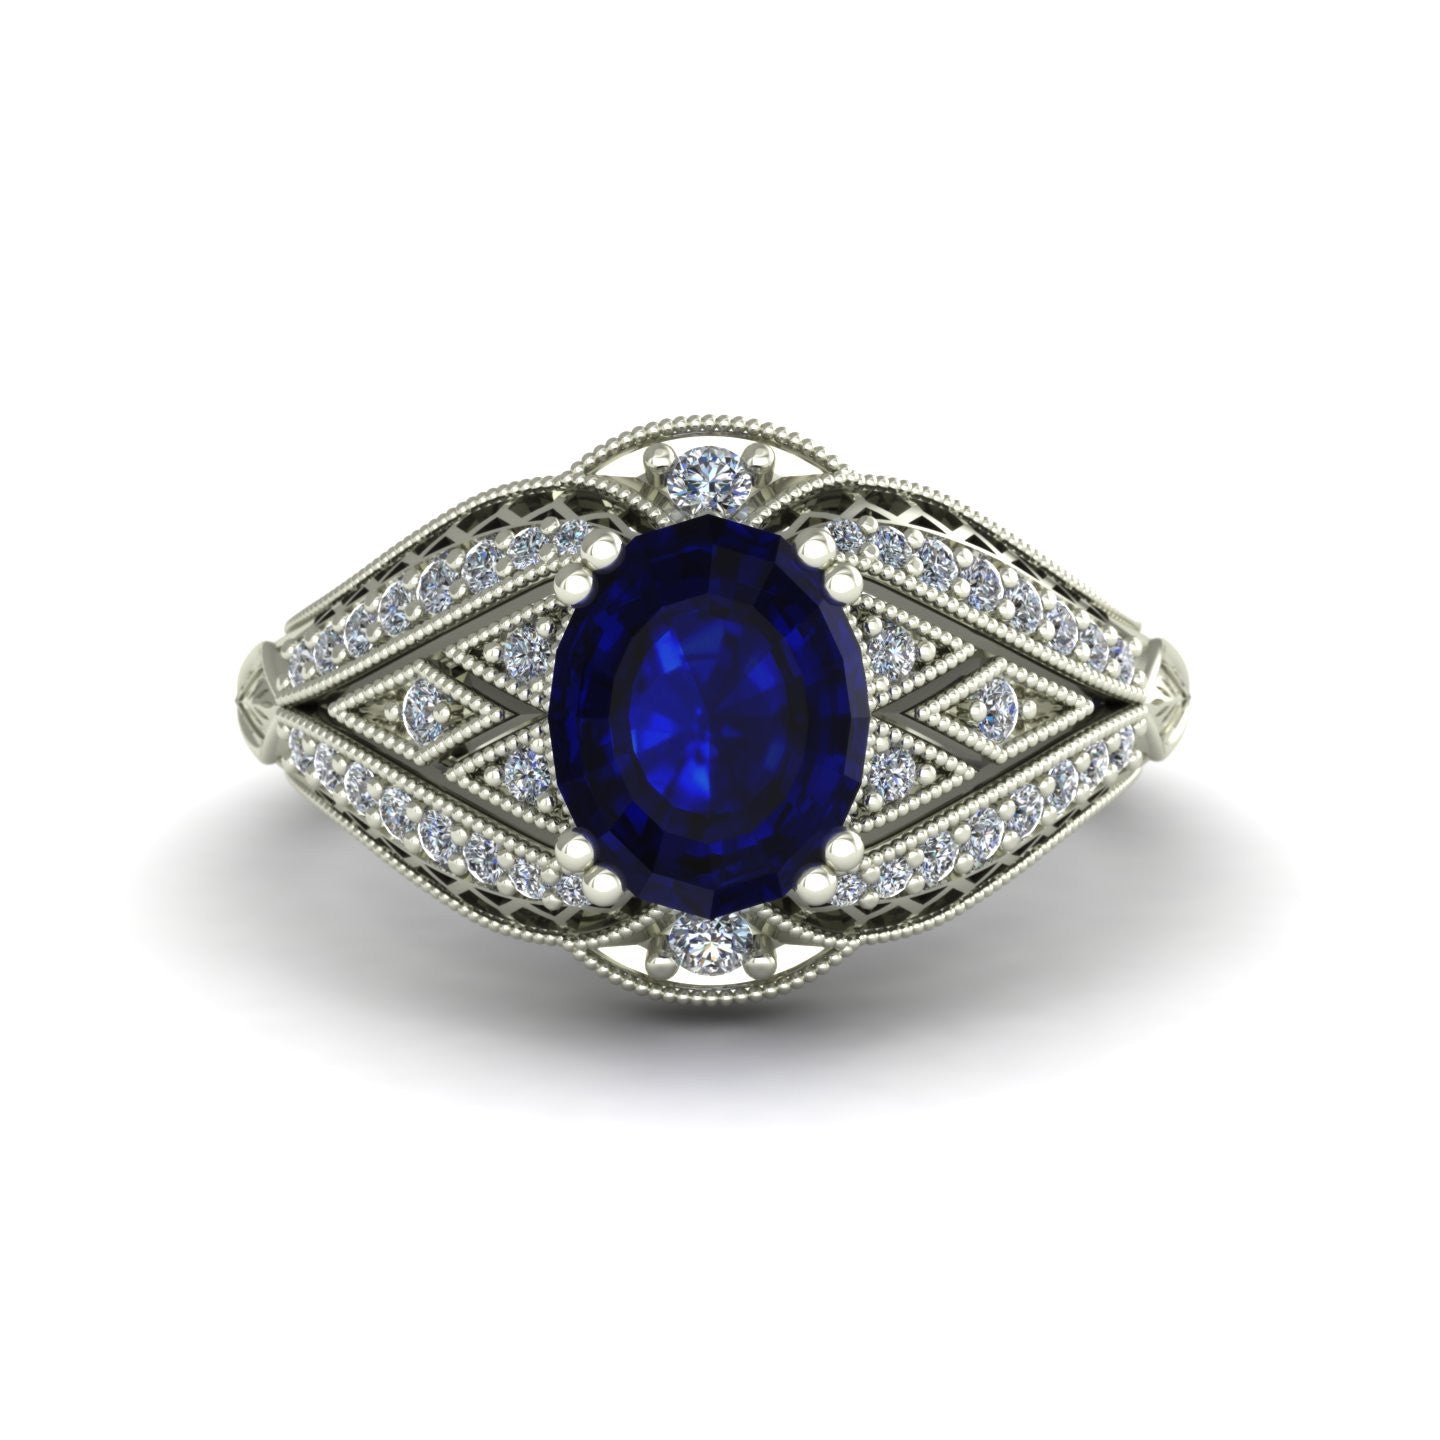 oval blue sapphire and diamond vintage inspired ring 14k white gold - Charles Babb Designs - top view